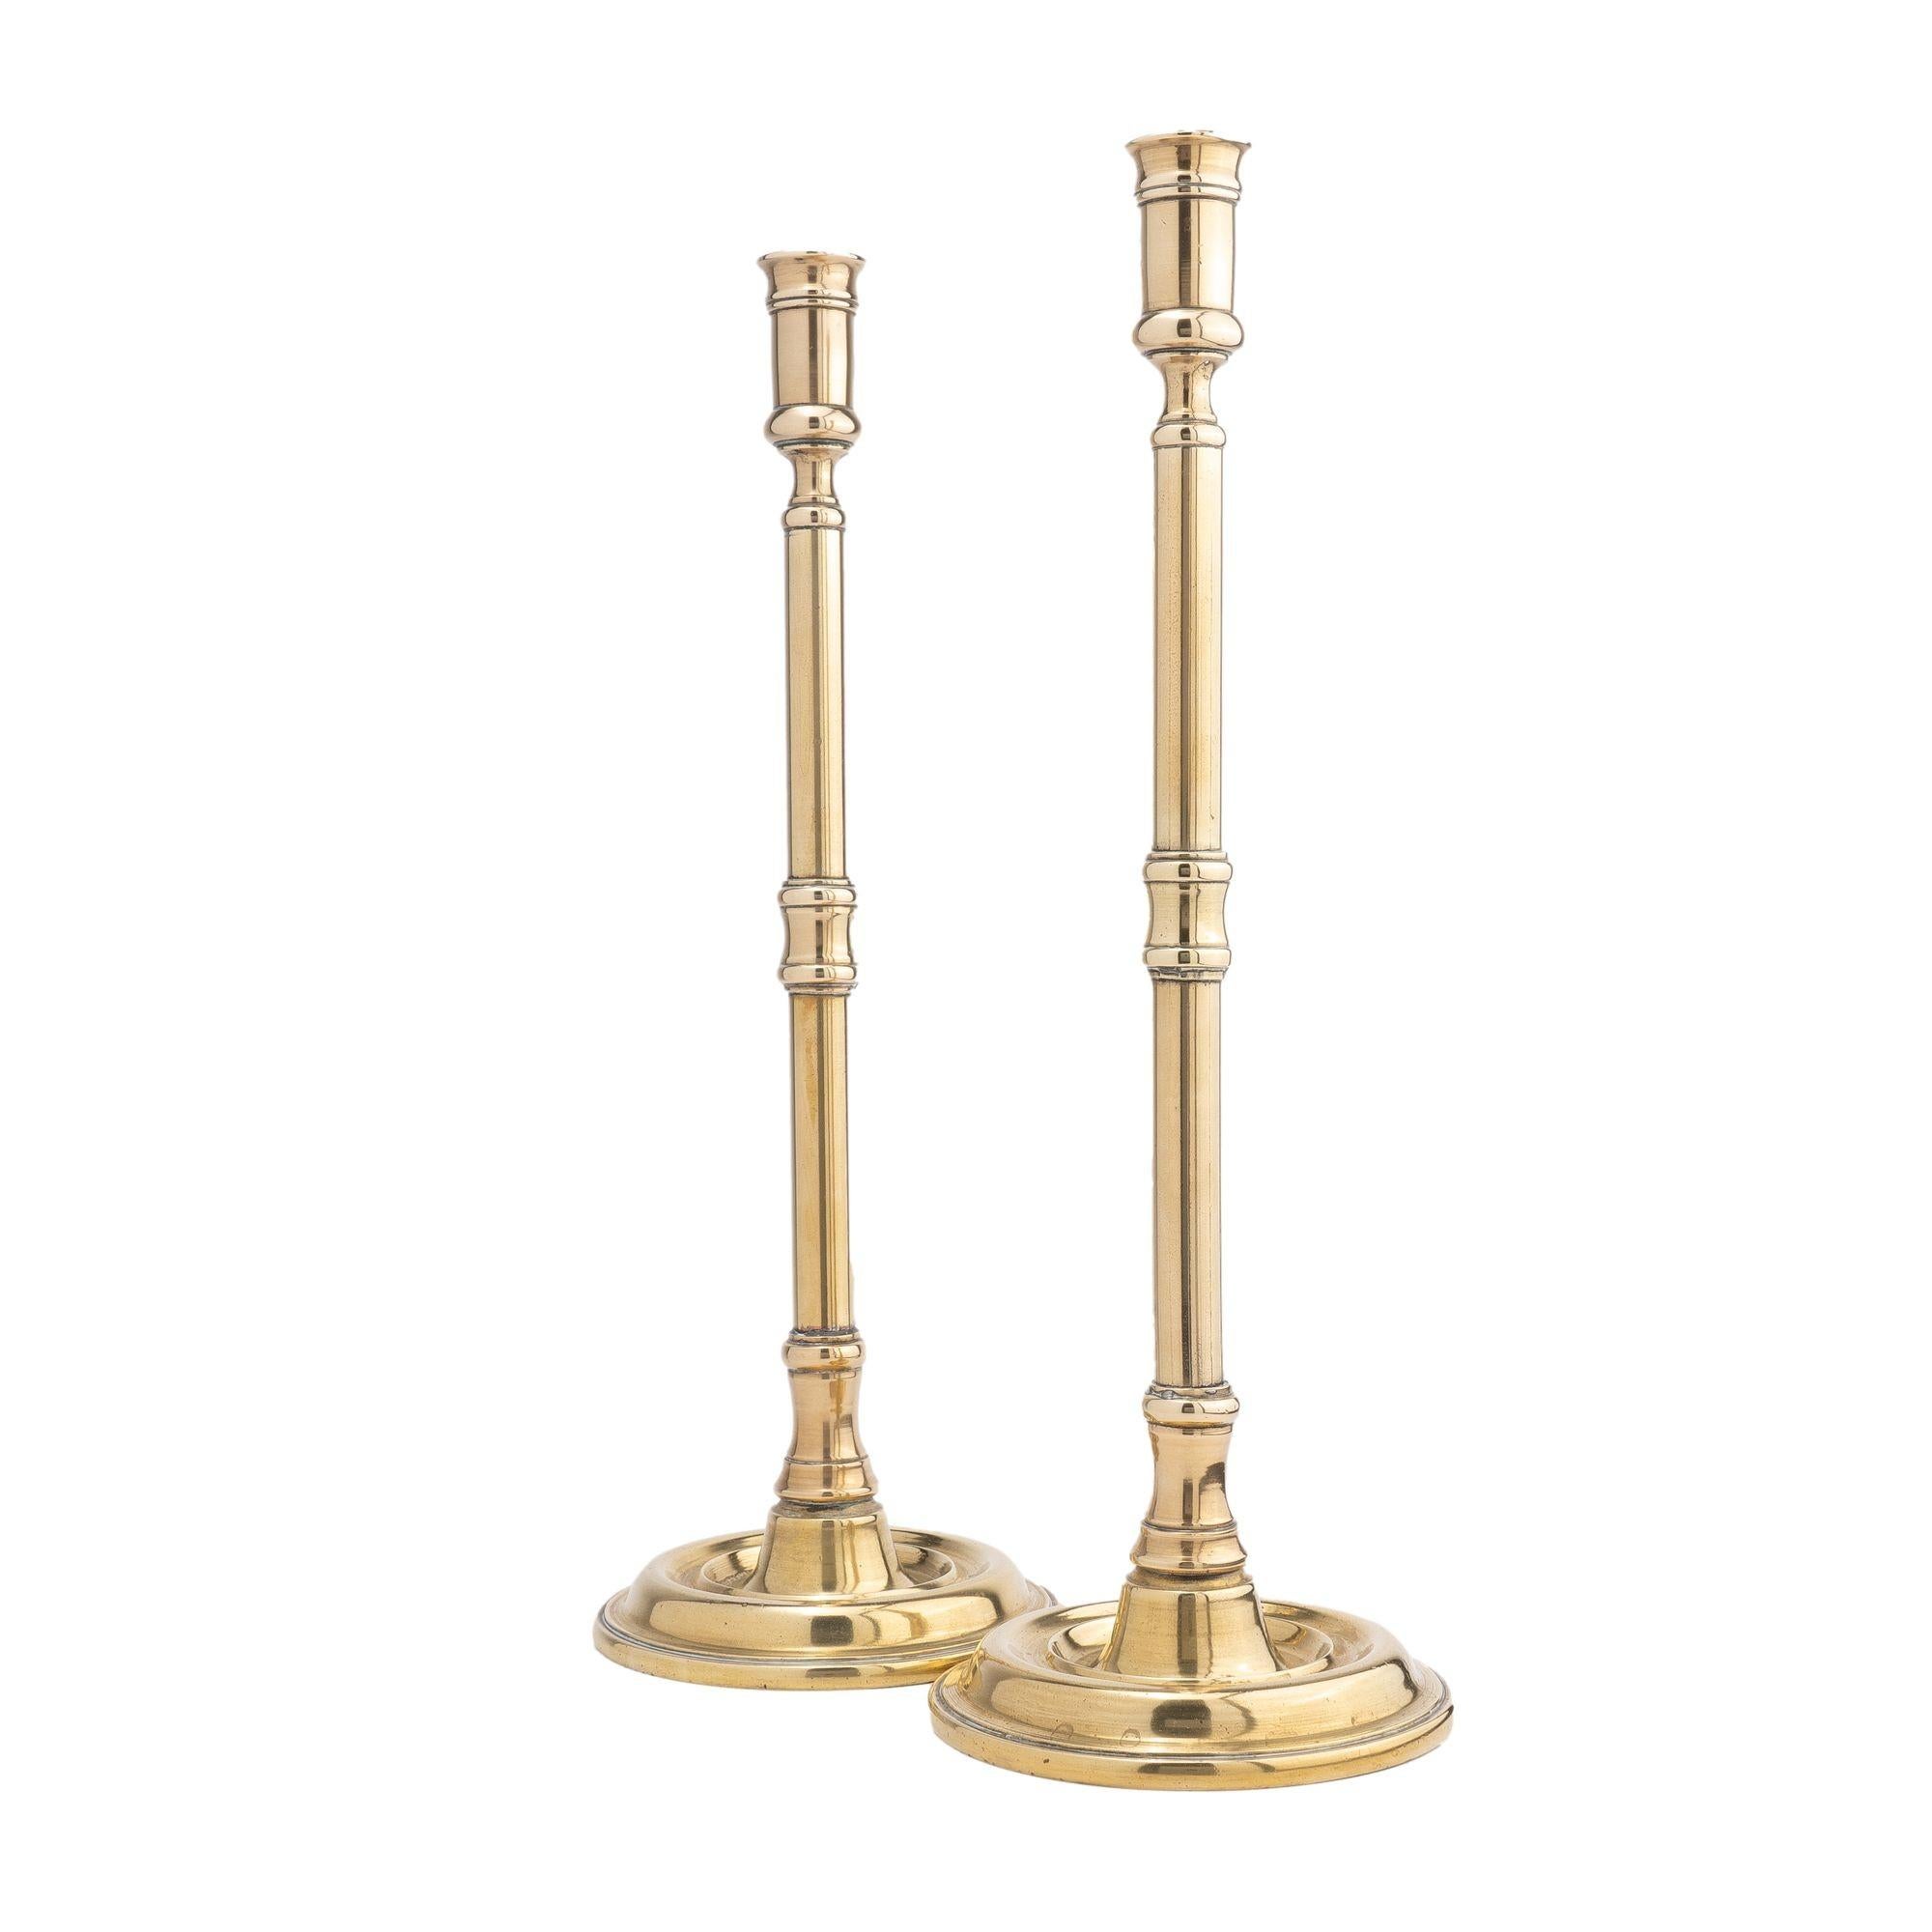 Pair of English tavern candlesticks, with an elongated candle cup on a tubular shaft. The shaft is interrupted by a beaded edge, concave molding, repeated at the base joining the circular dished base and peened to the shaft. One candlestick is